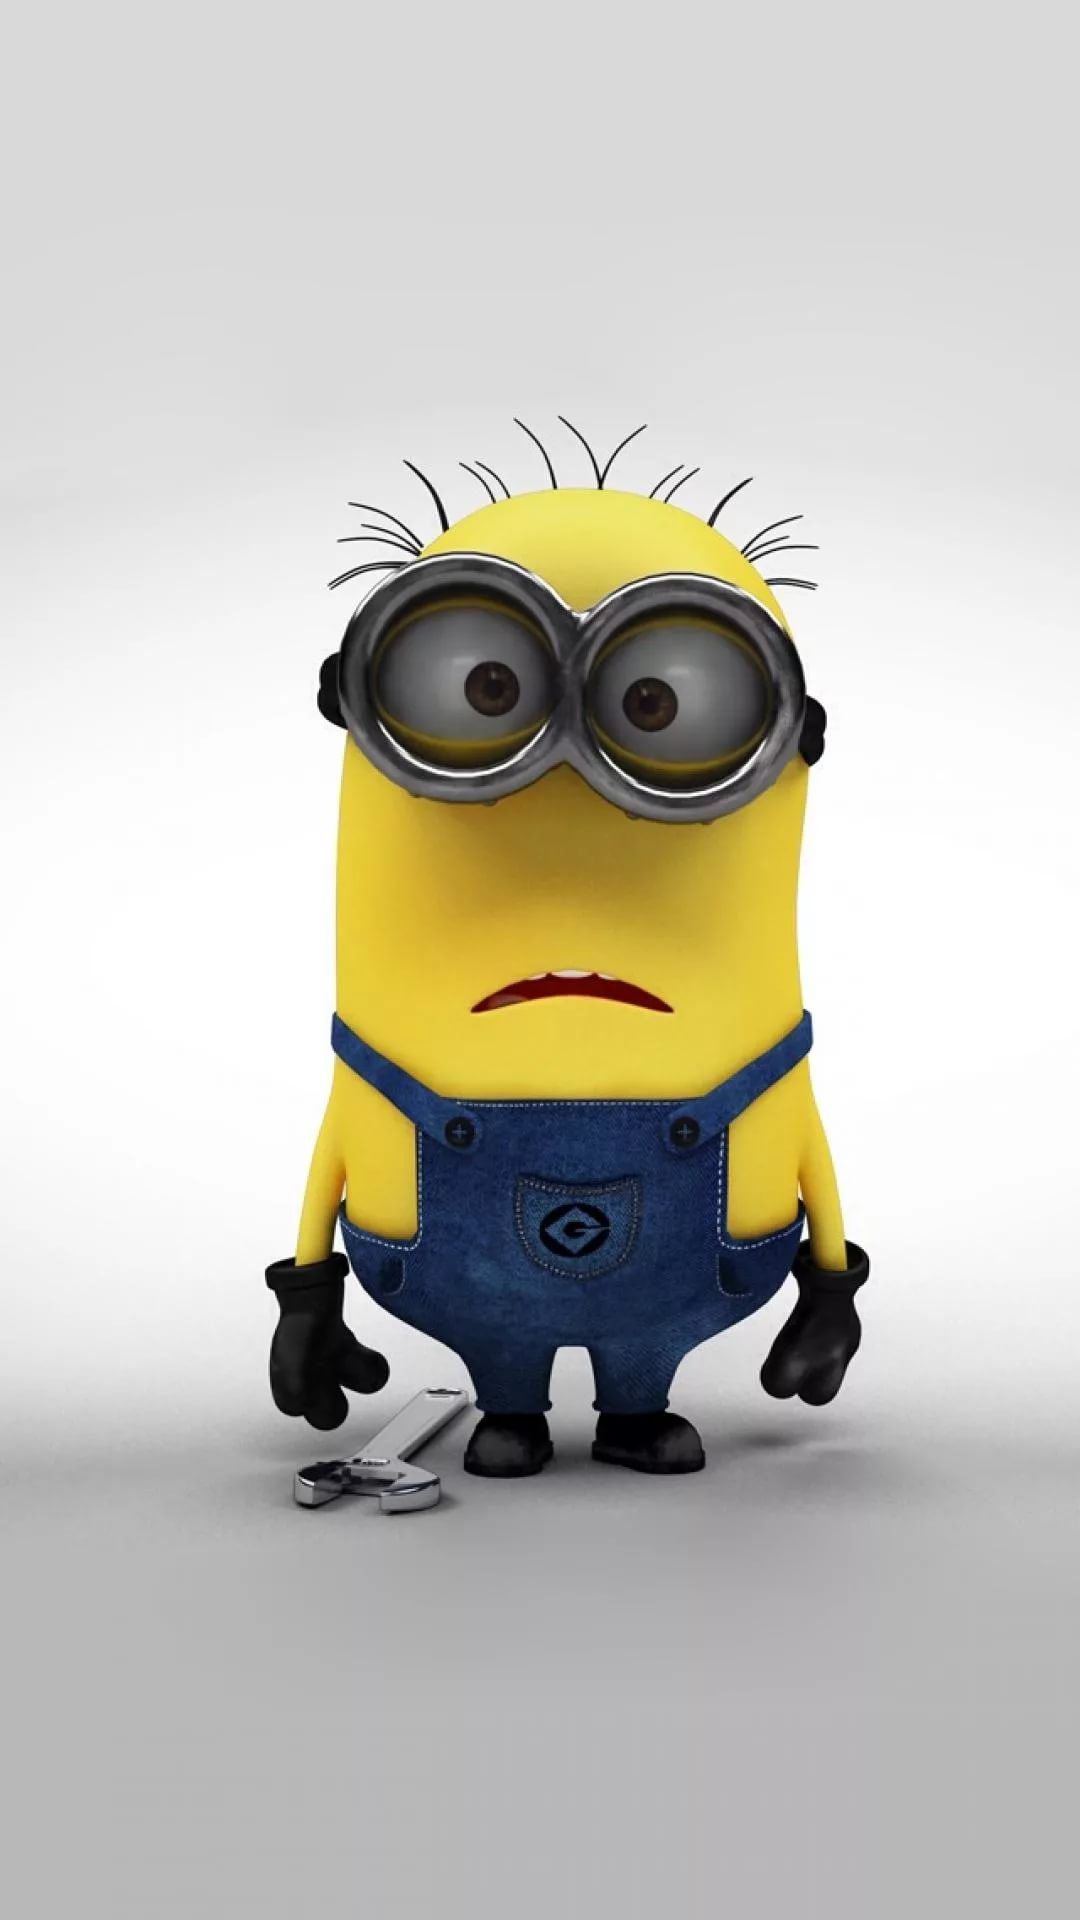 Minion wallpaper for iPhone